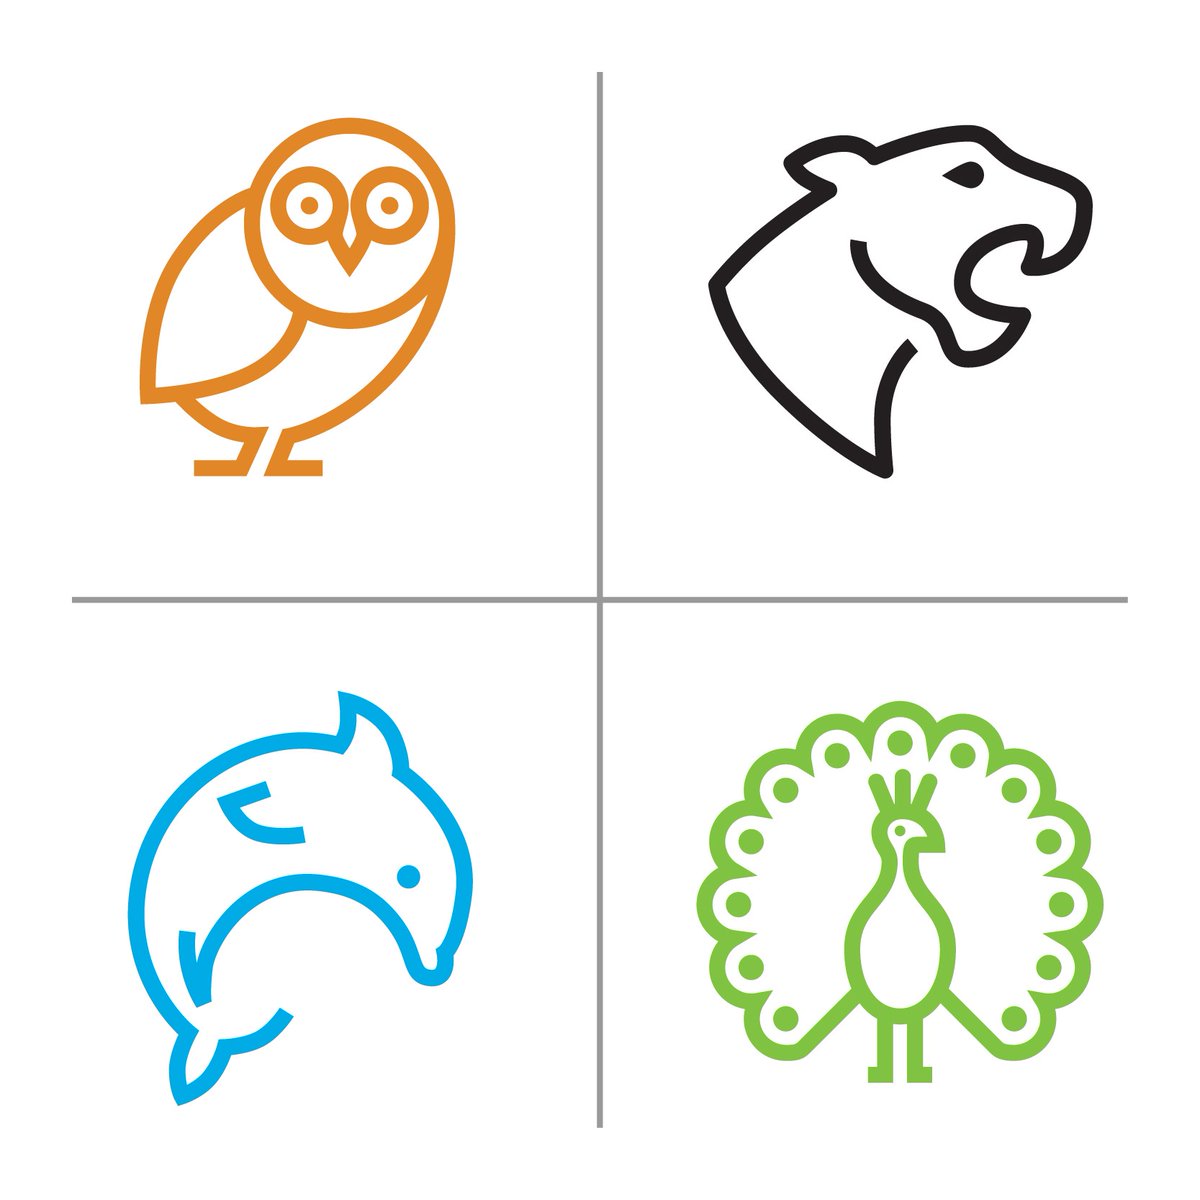 Are you a Panther, Dolphin, Peacock or Owl? Unleash your ‘Inner Animal’! Twittwoo! Kaka Kaka! Rawrrr!! https://t.co/nXVvv0KKHK #ServiceAnimals #CustomerExperience #TeamBuilding #PatExp #PatientExperience https://t.co/nsn83Y6XNN